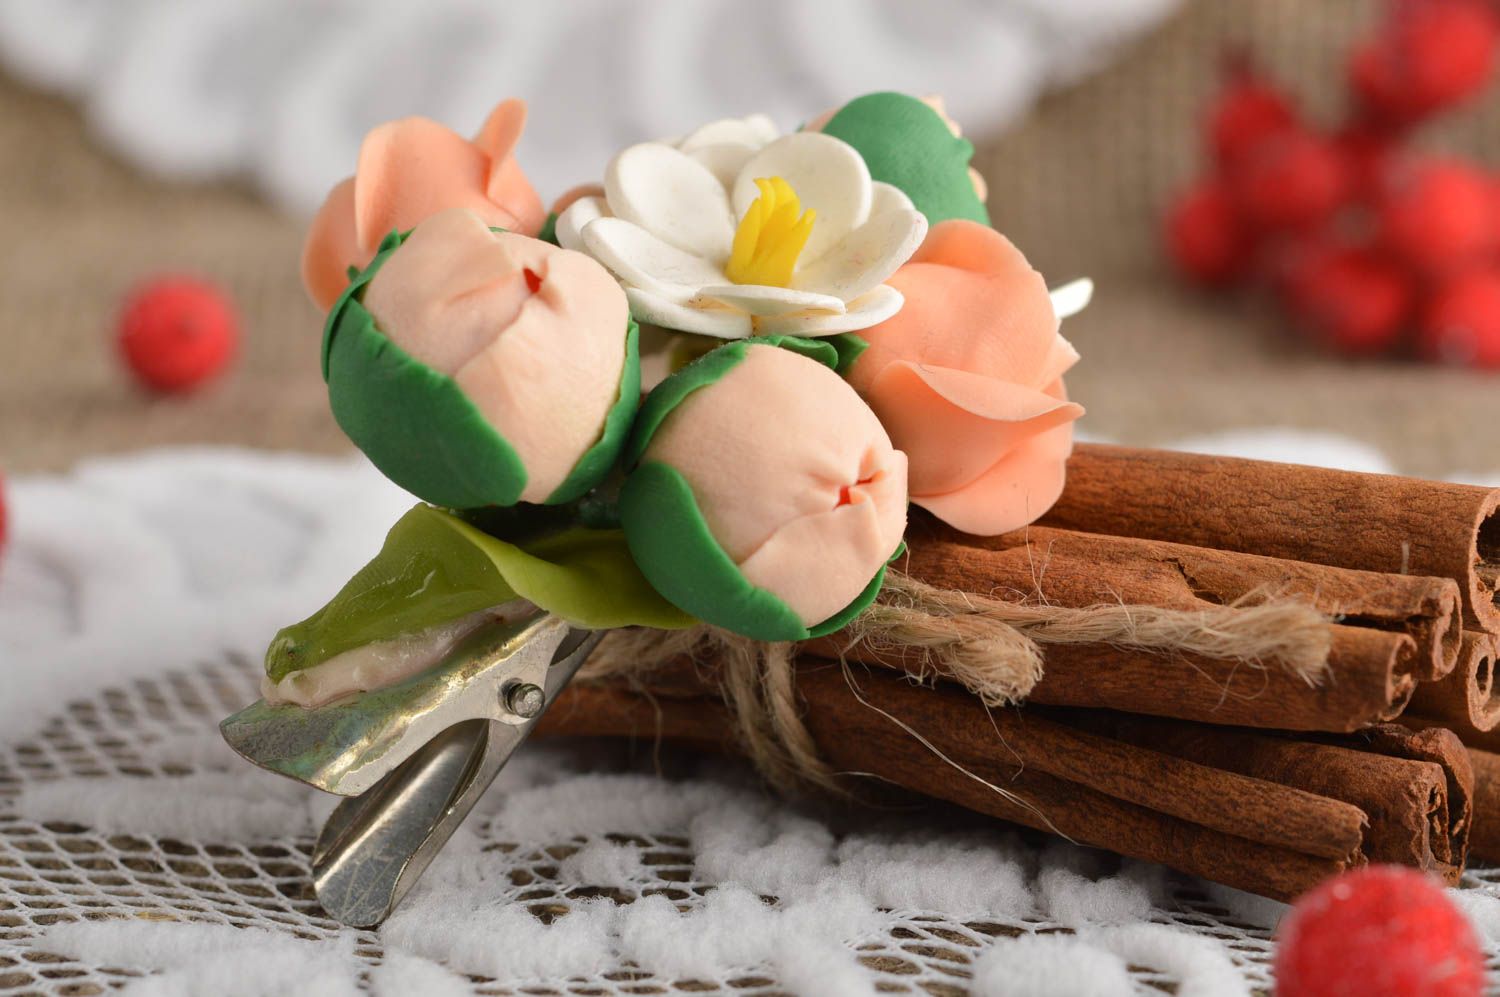 Beautiful handmade hair clip flower barrette polymer clay ideas gifts for her photo 1